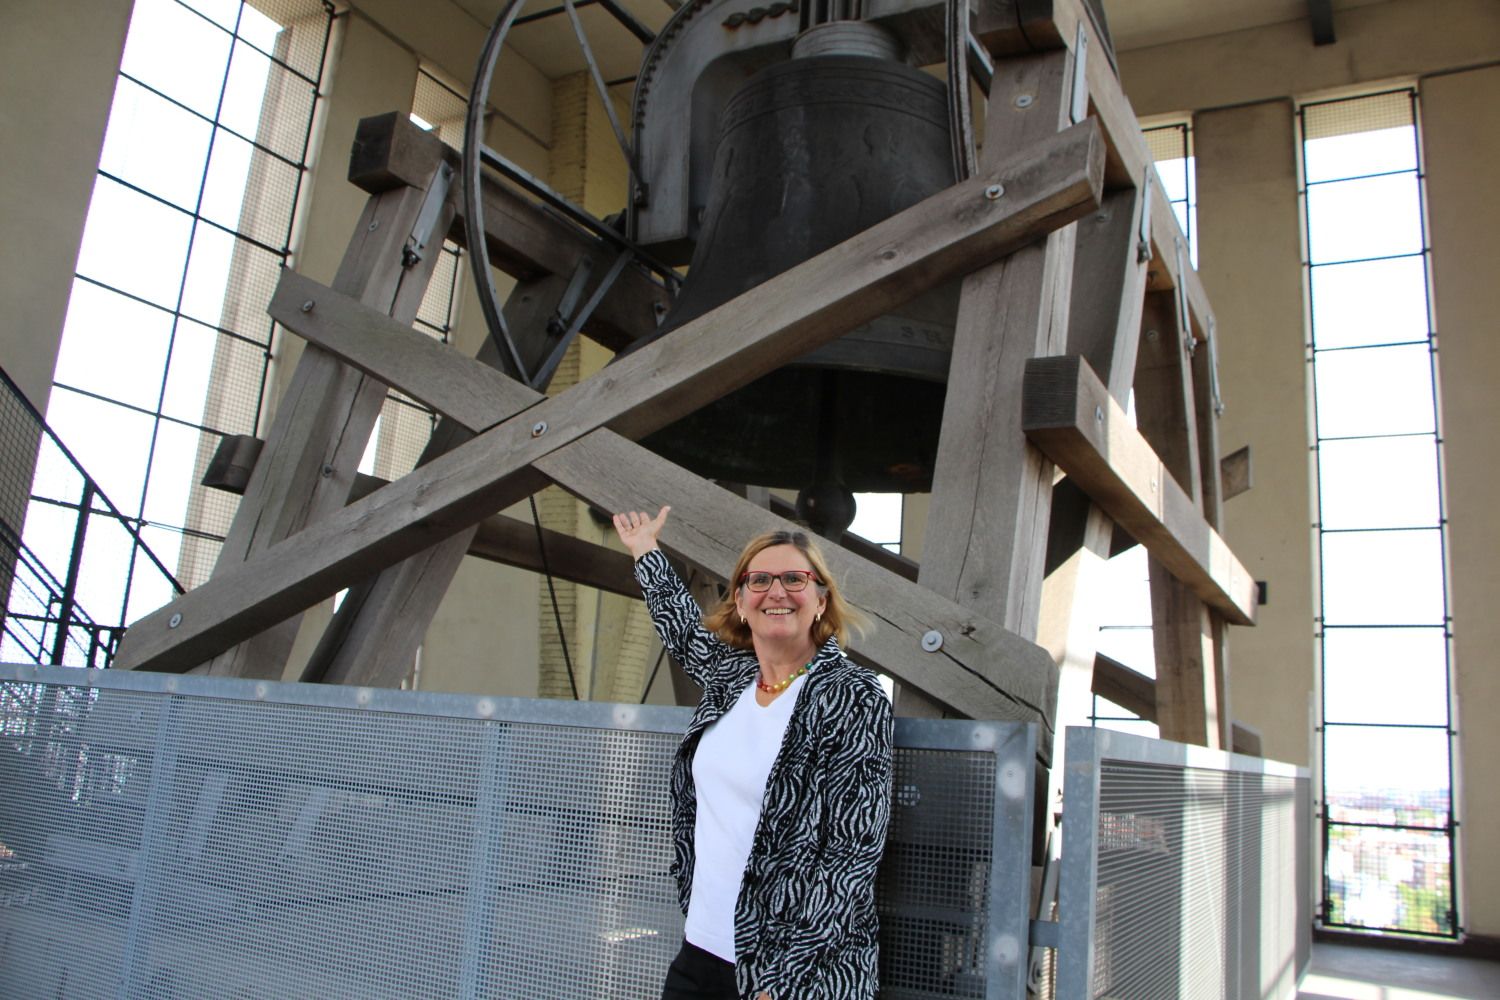 Smiling woman is standing in front of a large cast iron bell, which is hanging from a wooden scaffolding.